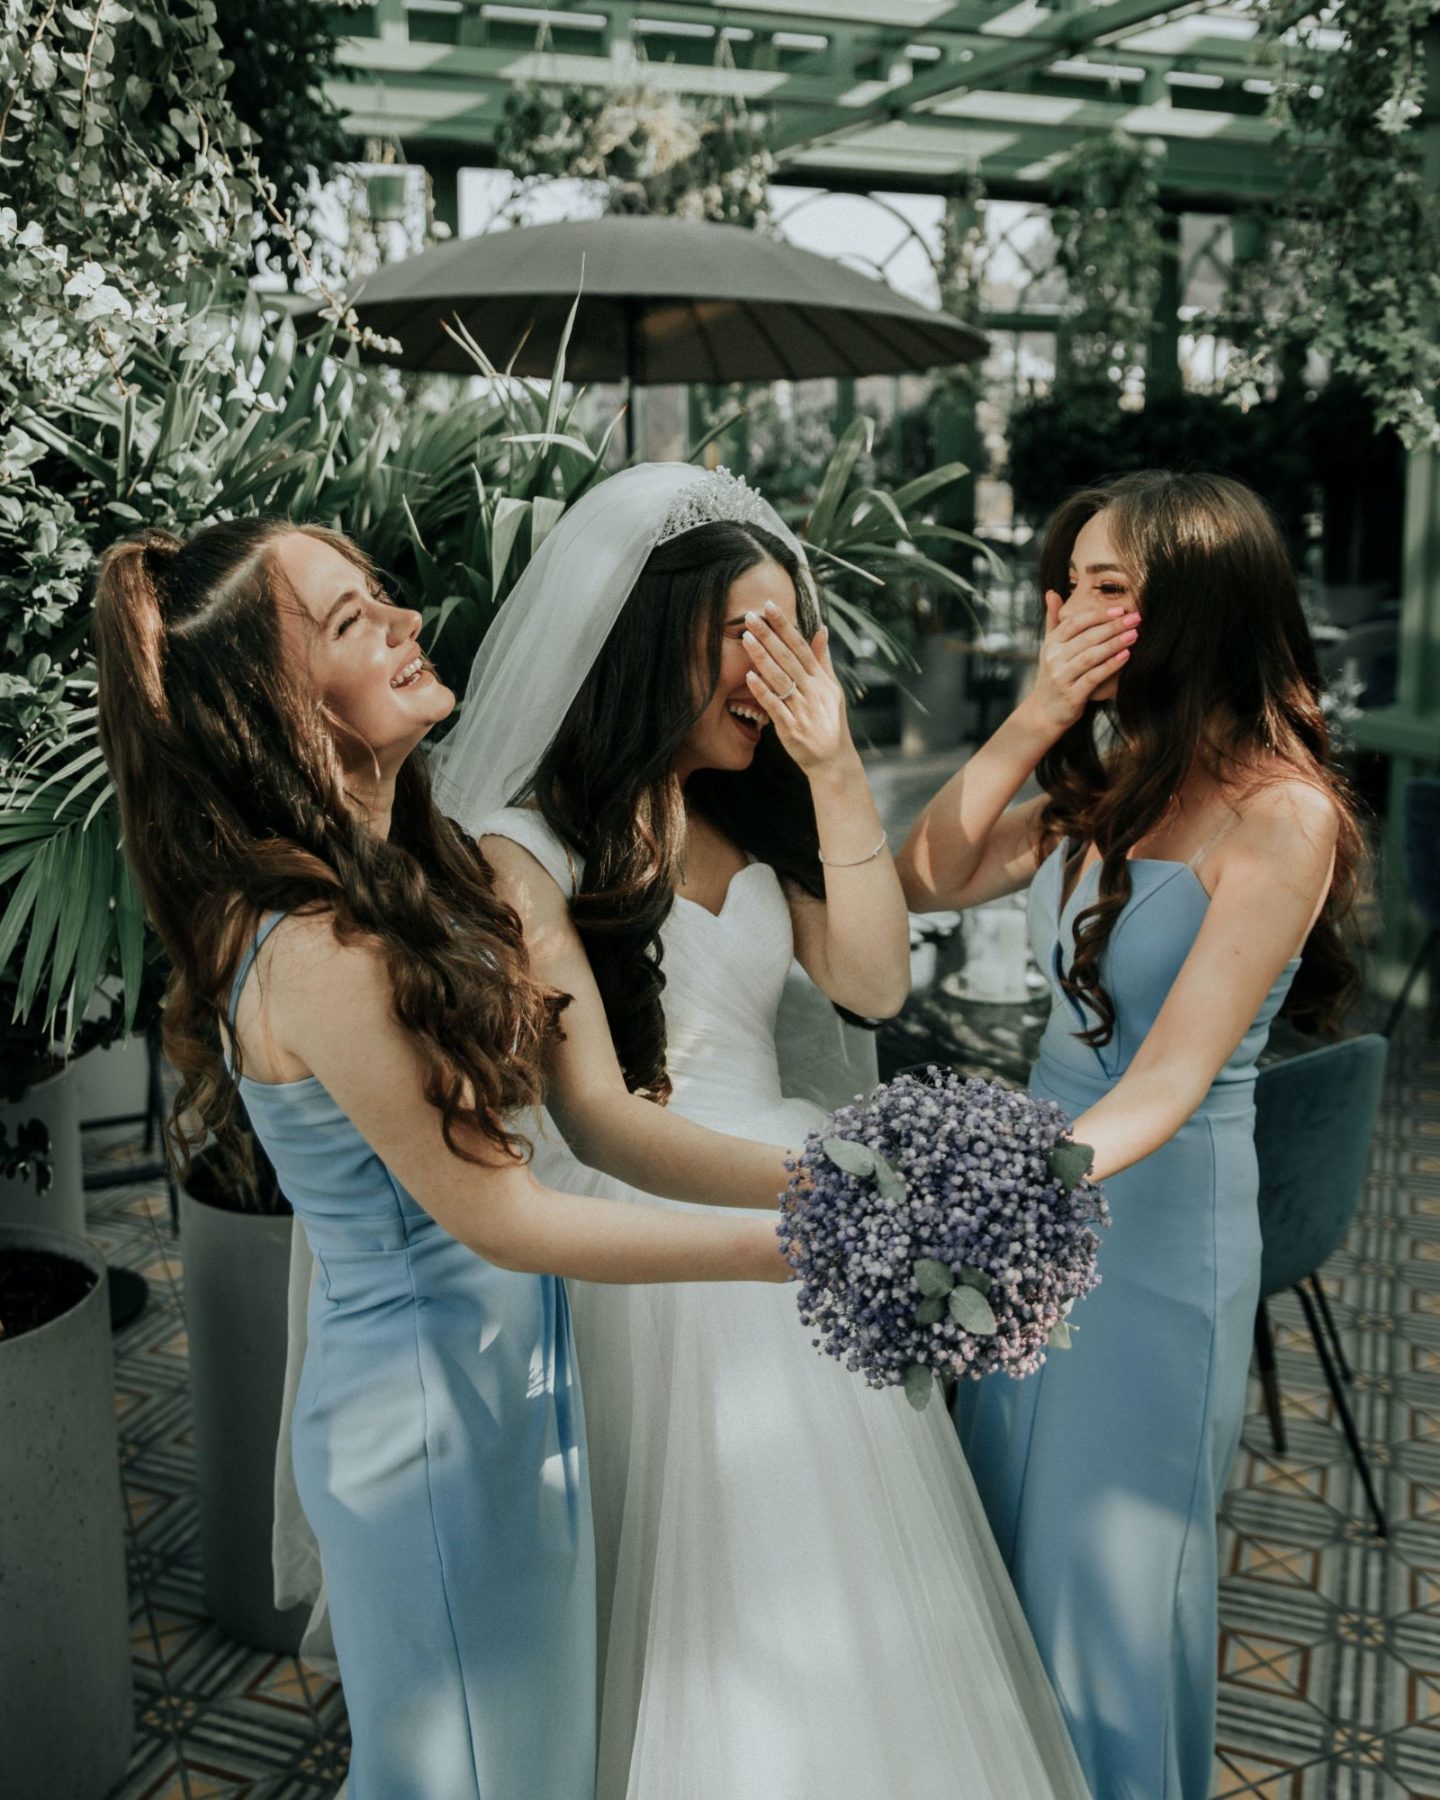 6 Unique Ways to Add Humour To Your Wedding Ceremony